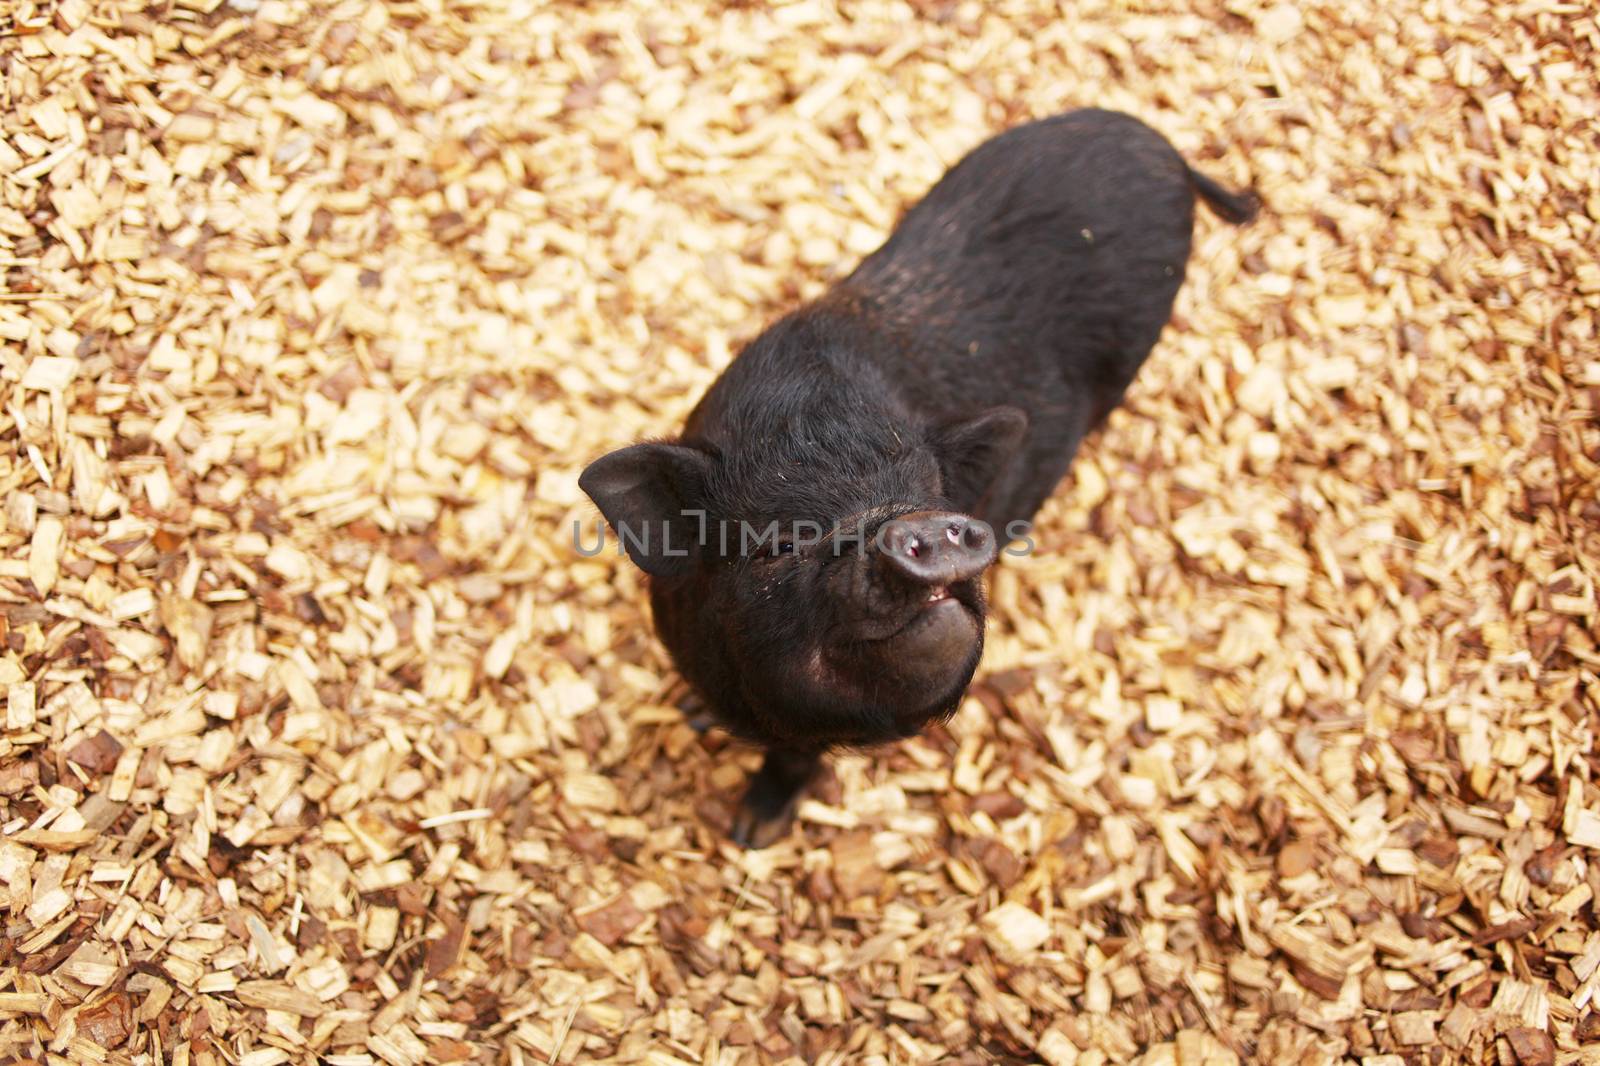 Pig with funny nose at a zoo